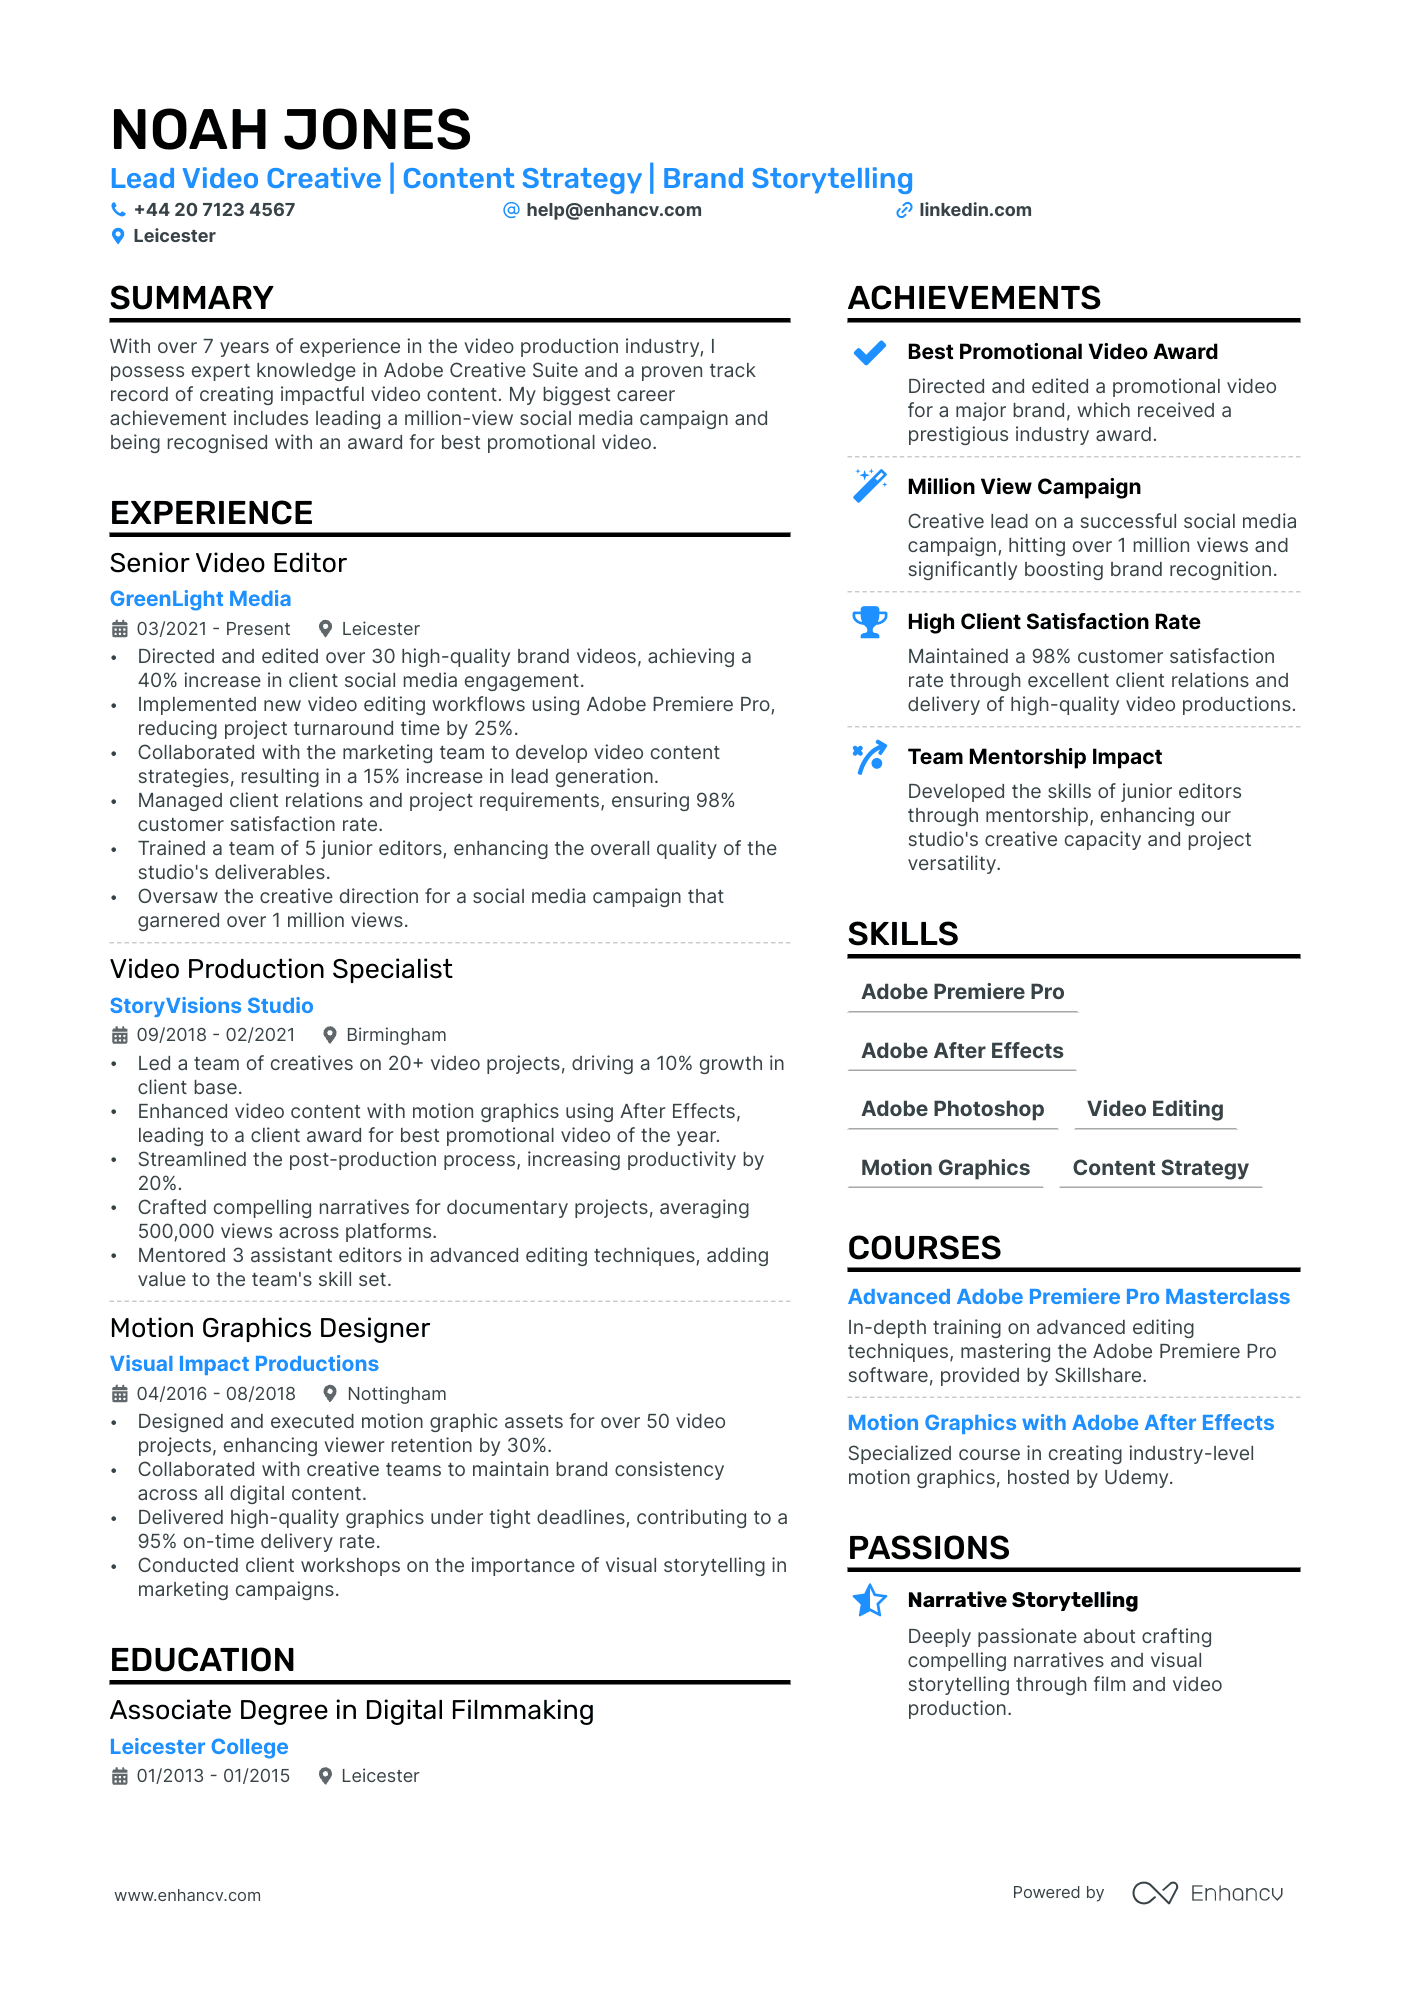 film production resume example